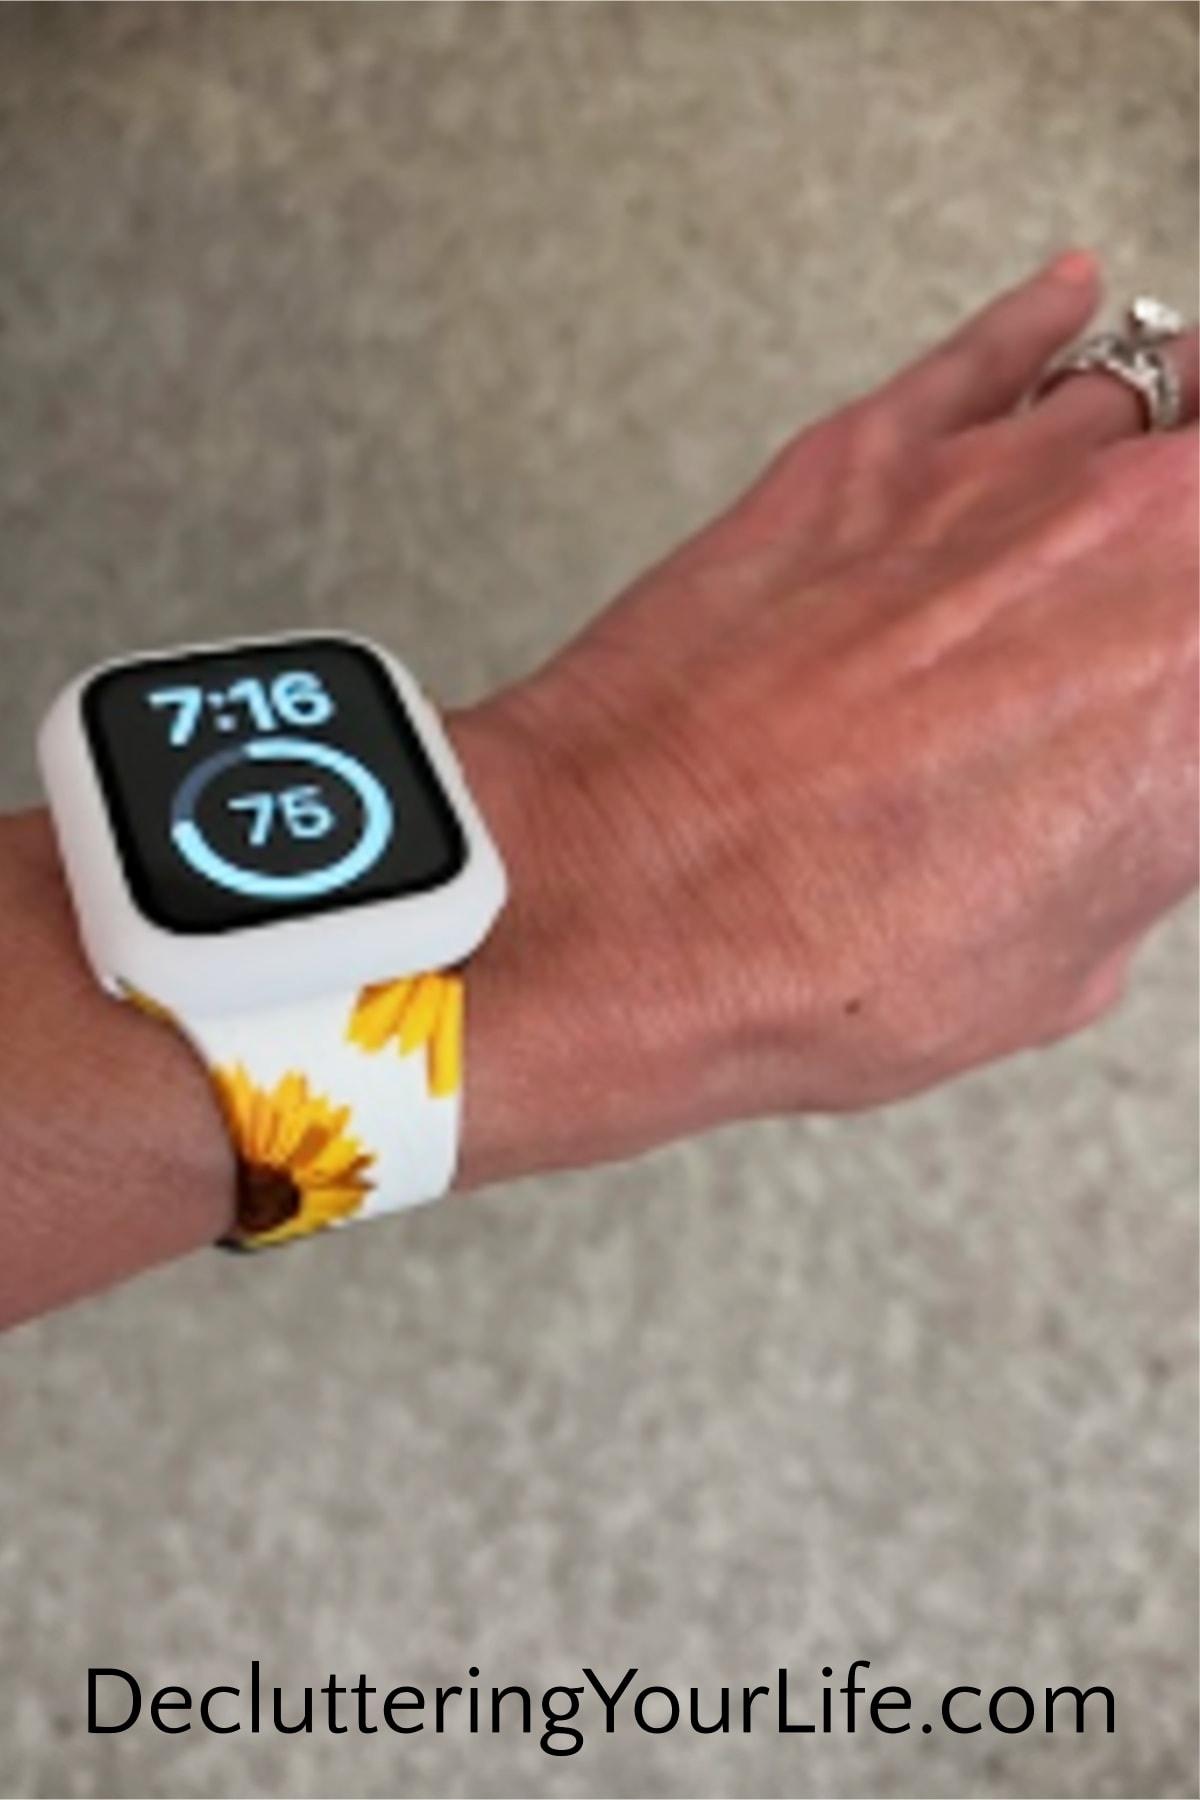 My sunflower Apple Watch band - I wear my Apple Watch for all my 10 minute decluttering challenges. It really helps declutter my home AND close all my fitness rings!